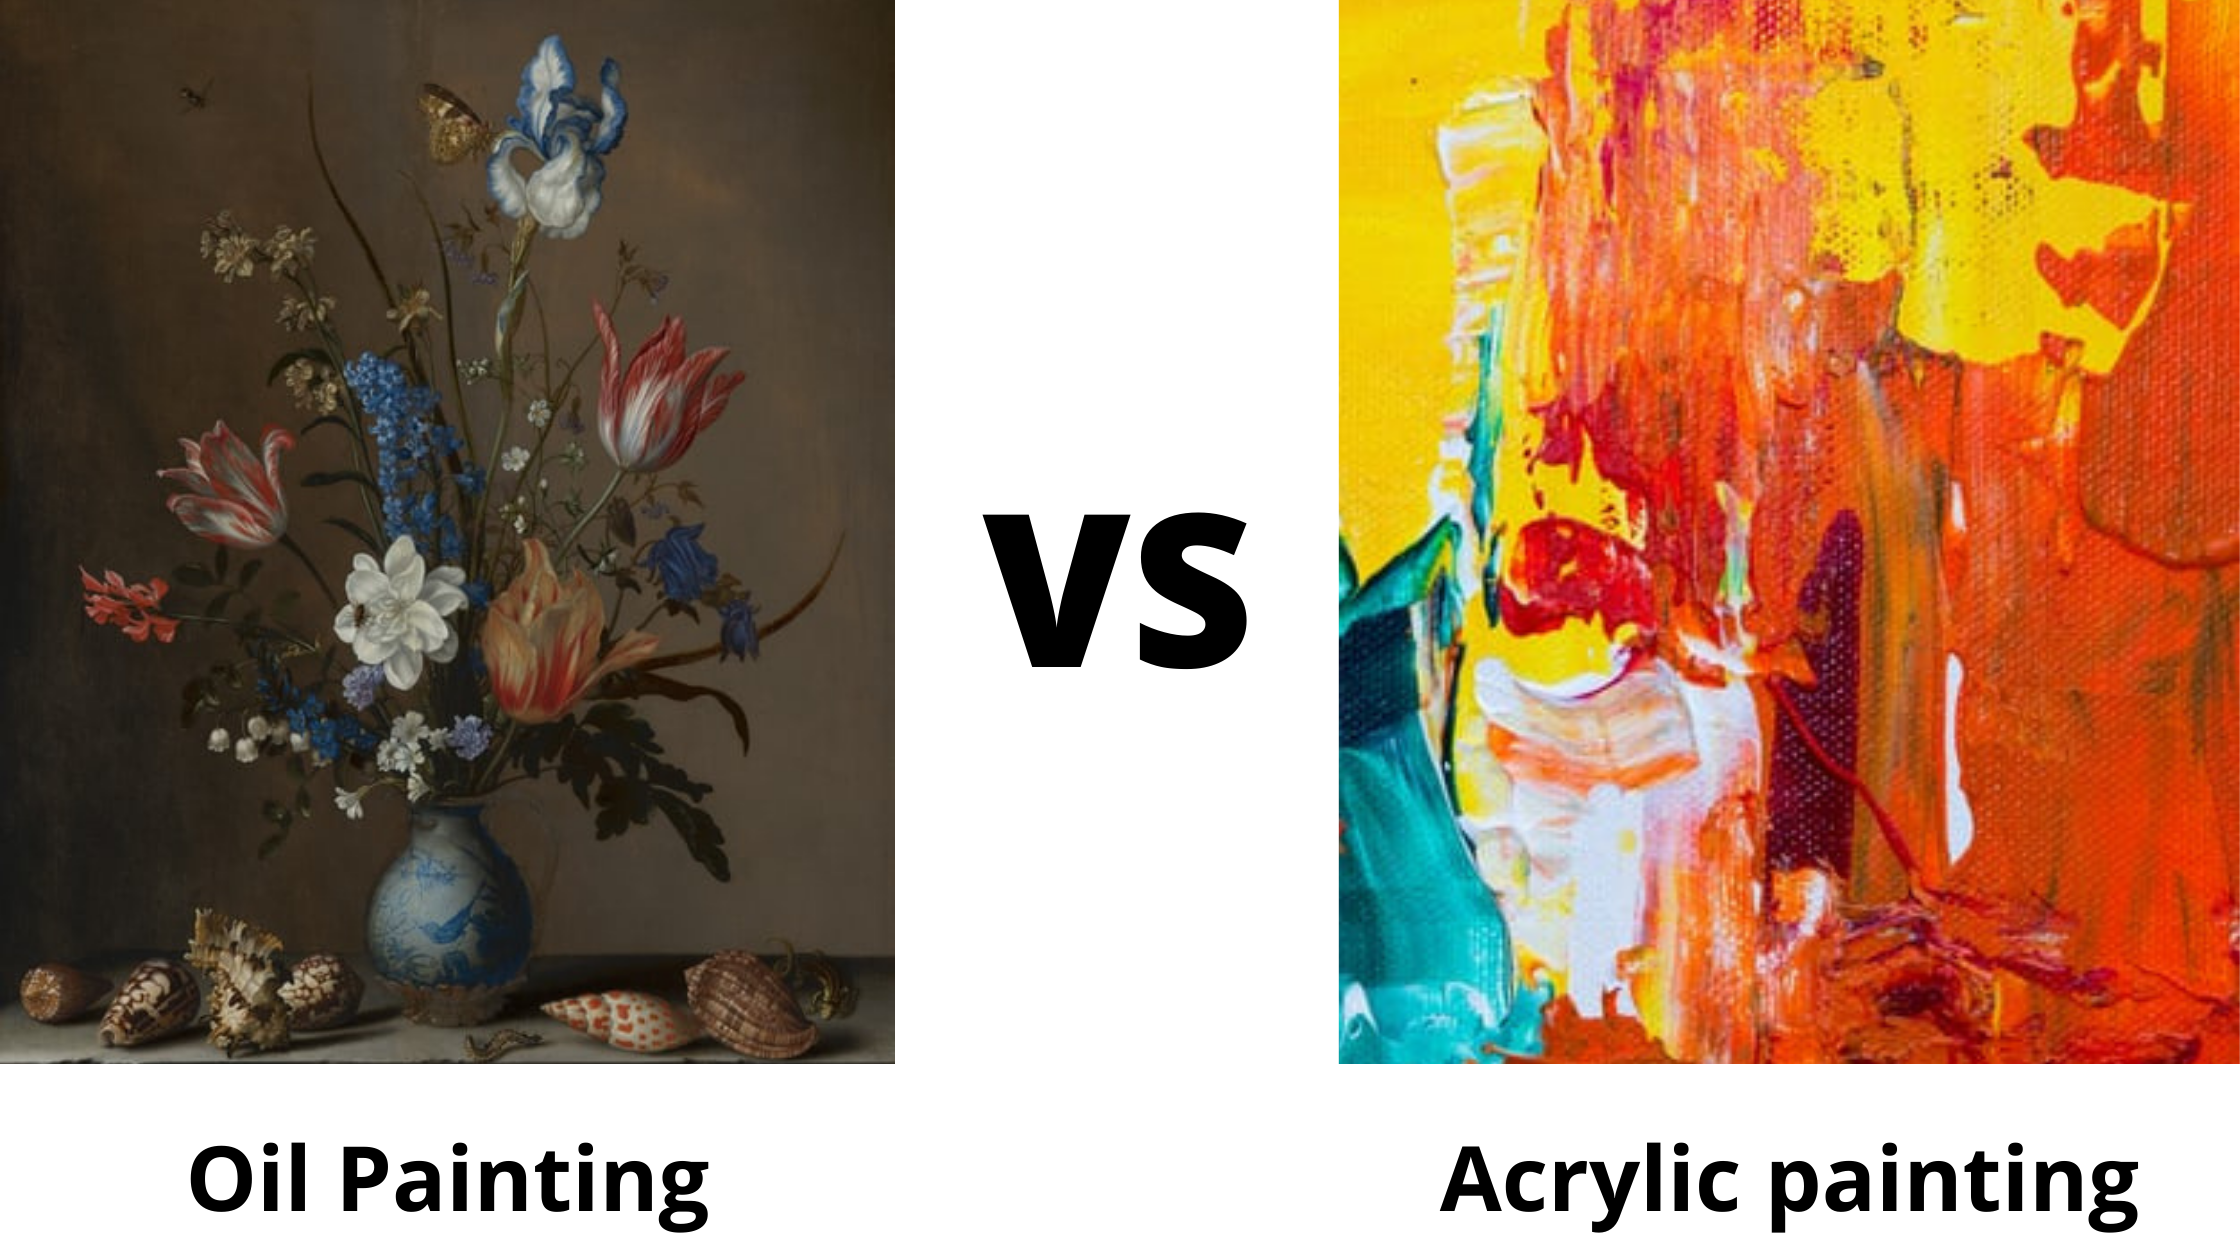 How to tell the difference between acrylic and oil painting?